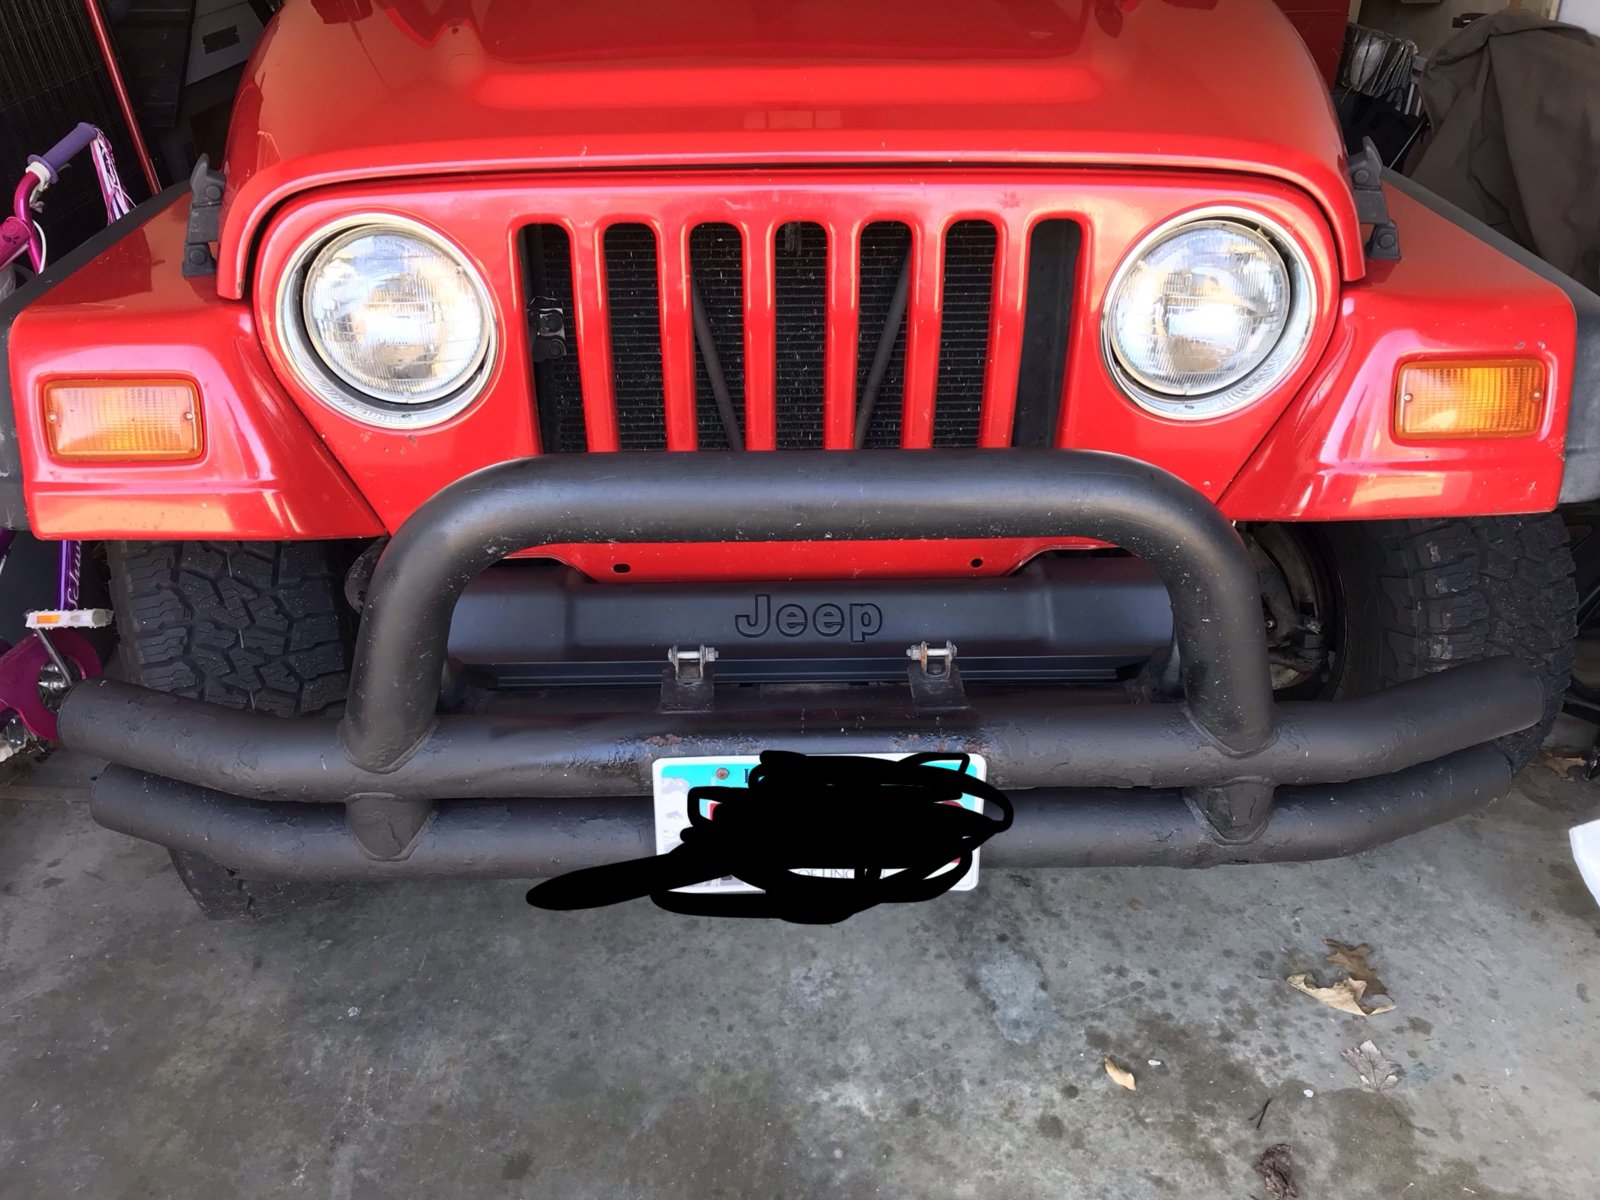 Best tow bar set up for an RV tow | Jeep Wrangler TJ Forum